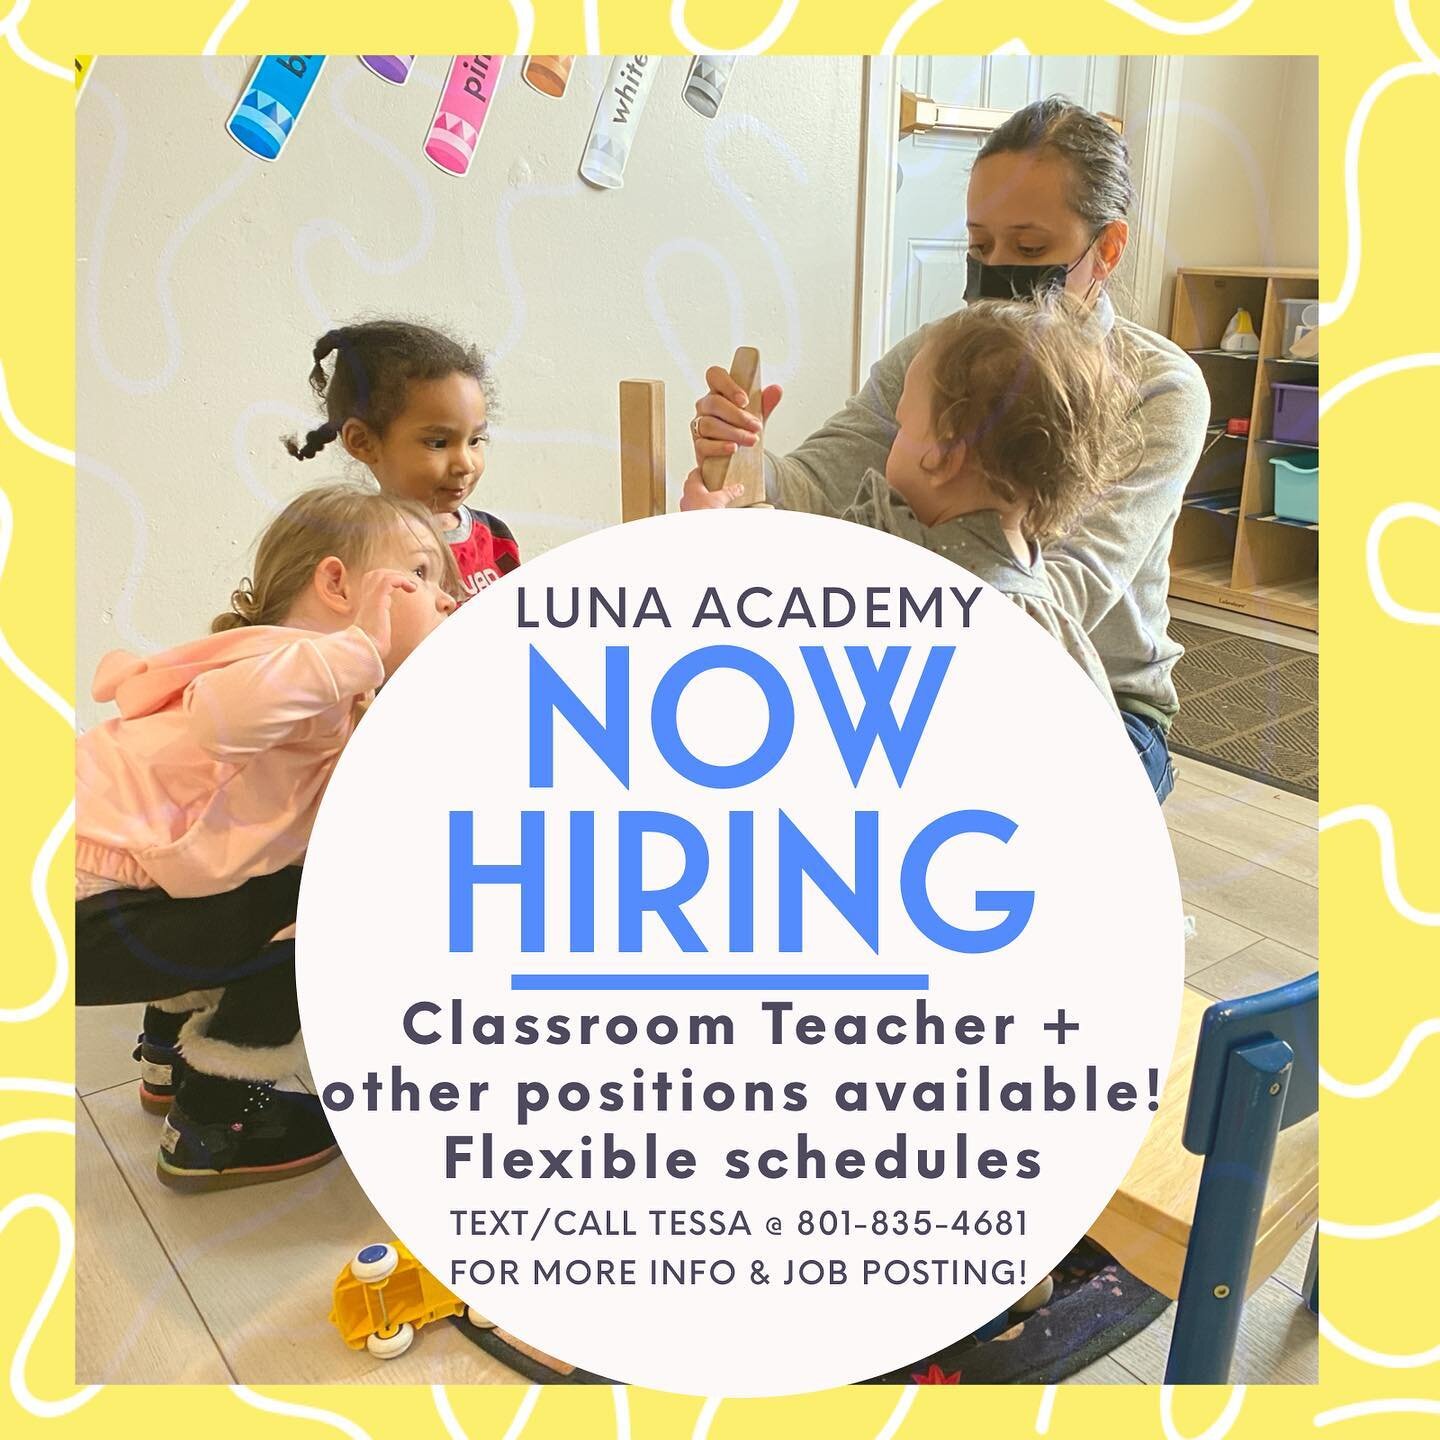 Please feel free to share! The following positions are available: Classroom Teacher, Substitute, Opener 

Message me for more info and specific job postings!